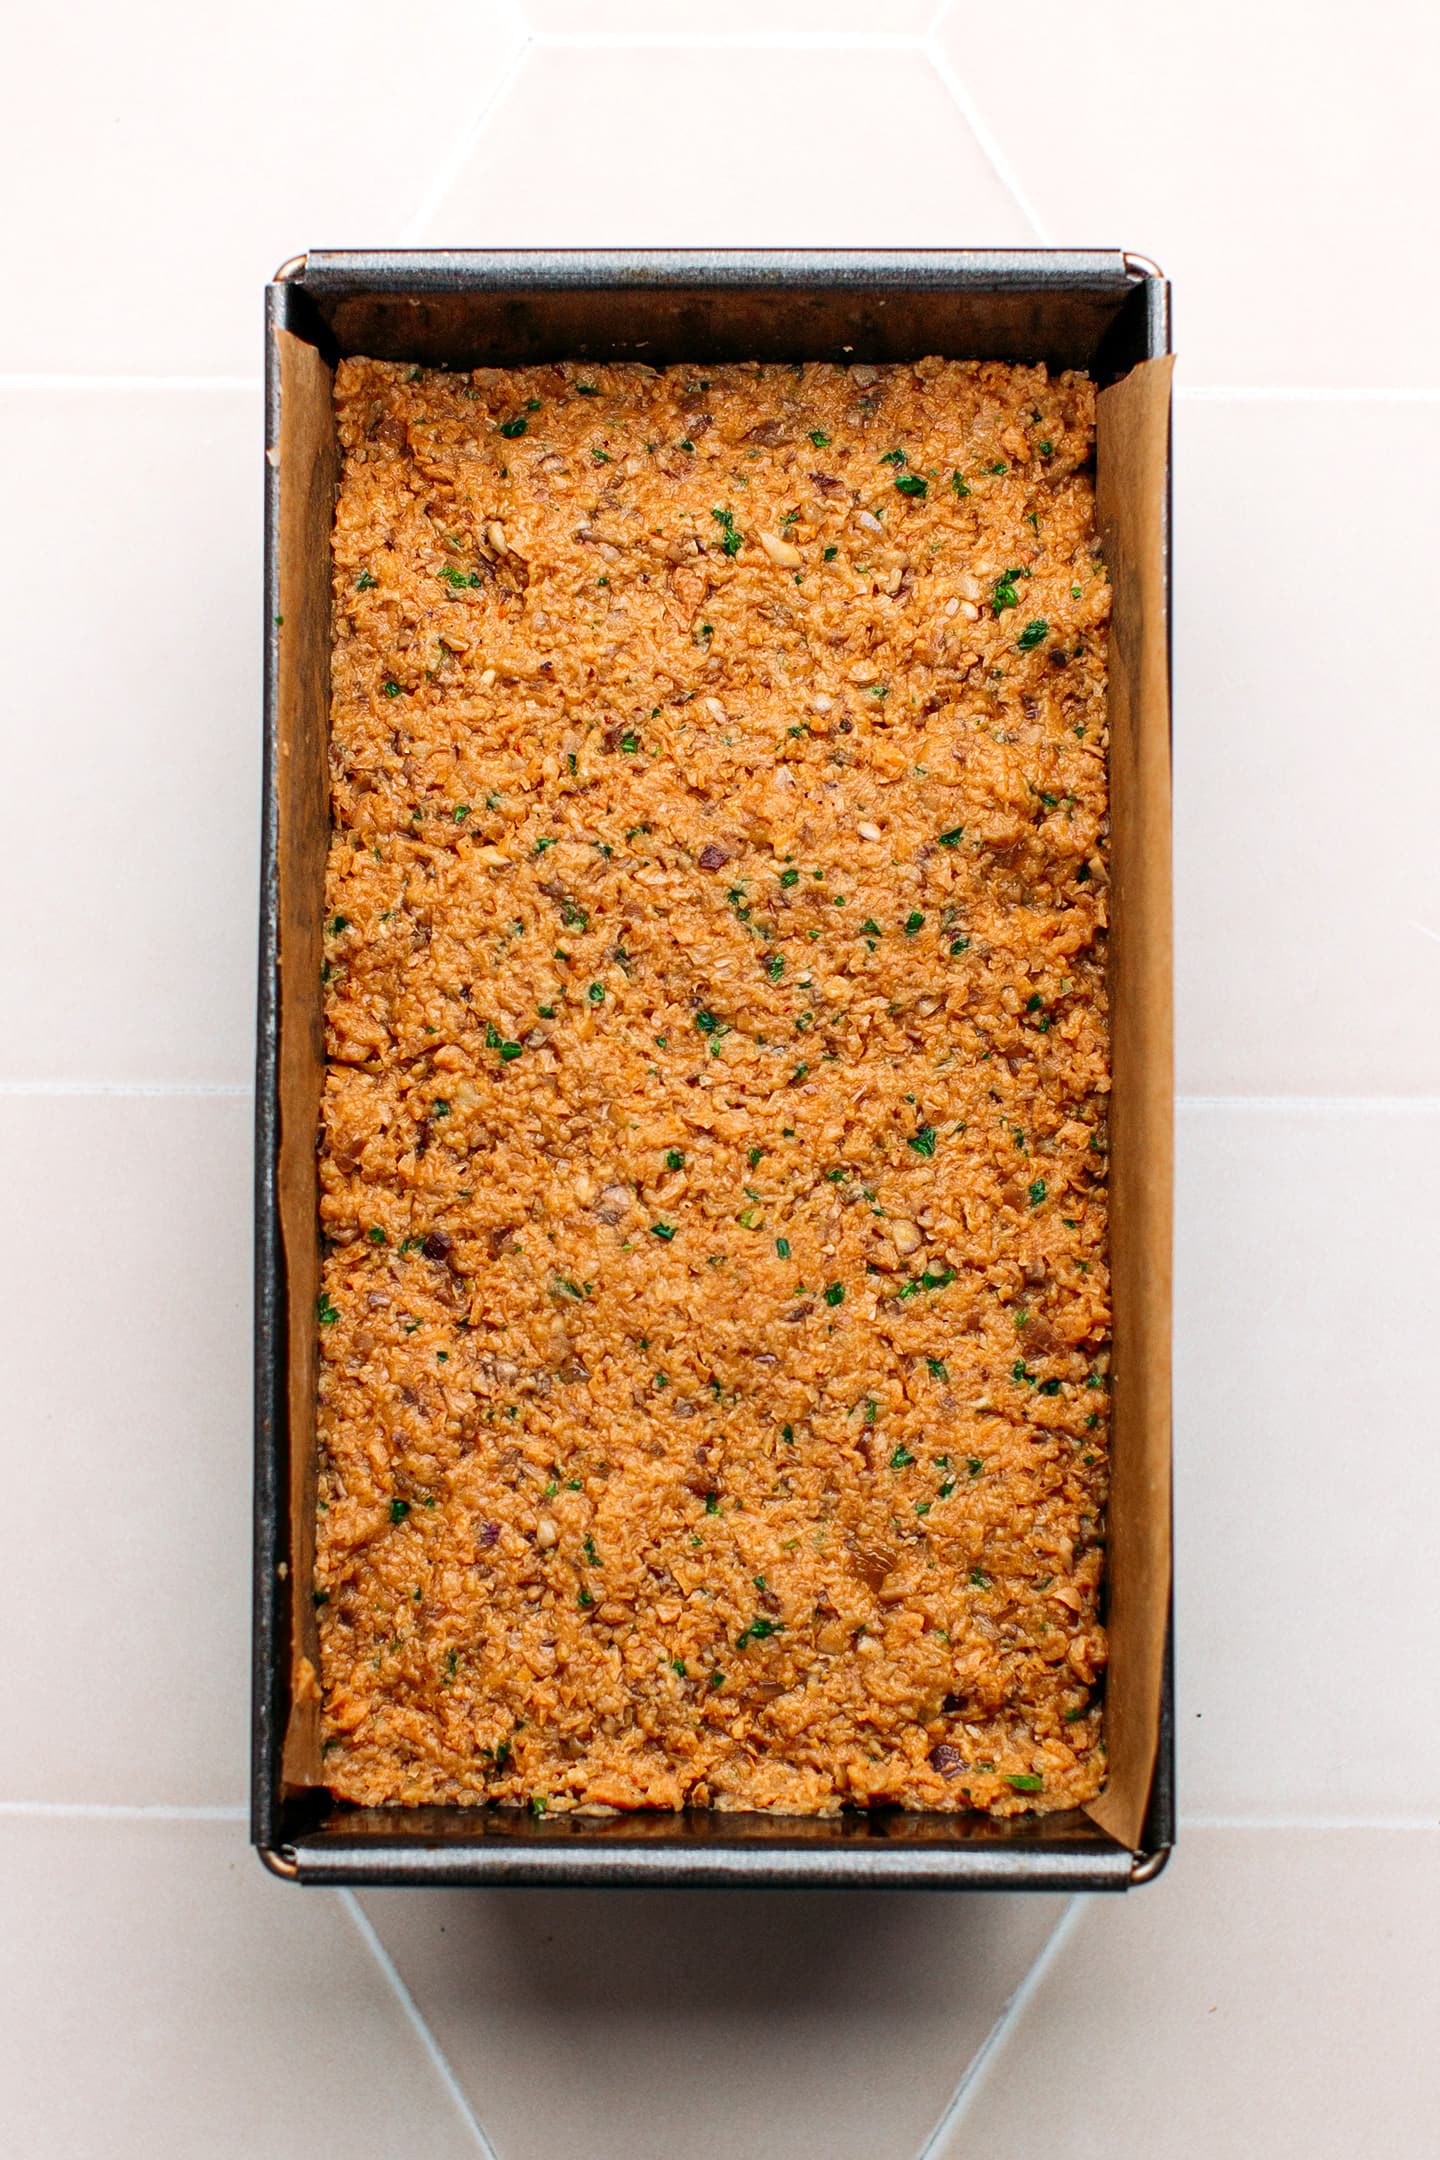 Uncooked meatloaf in a baking pan.